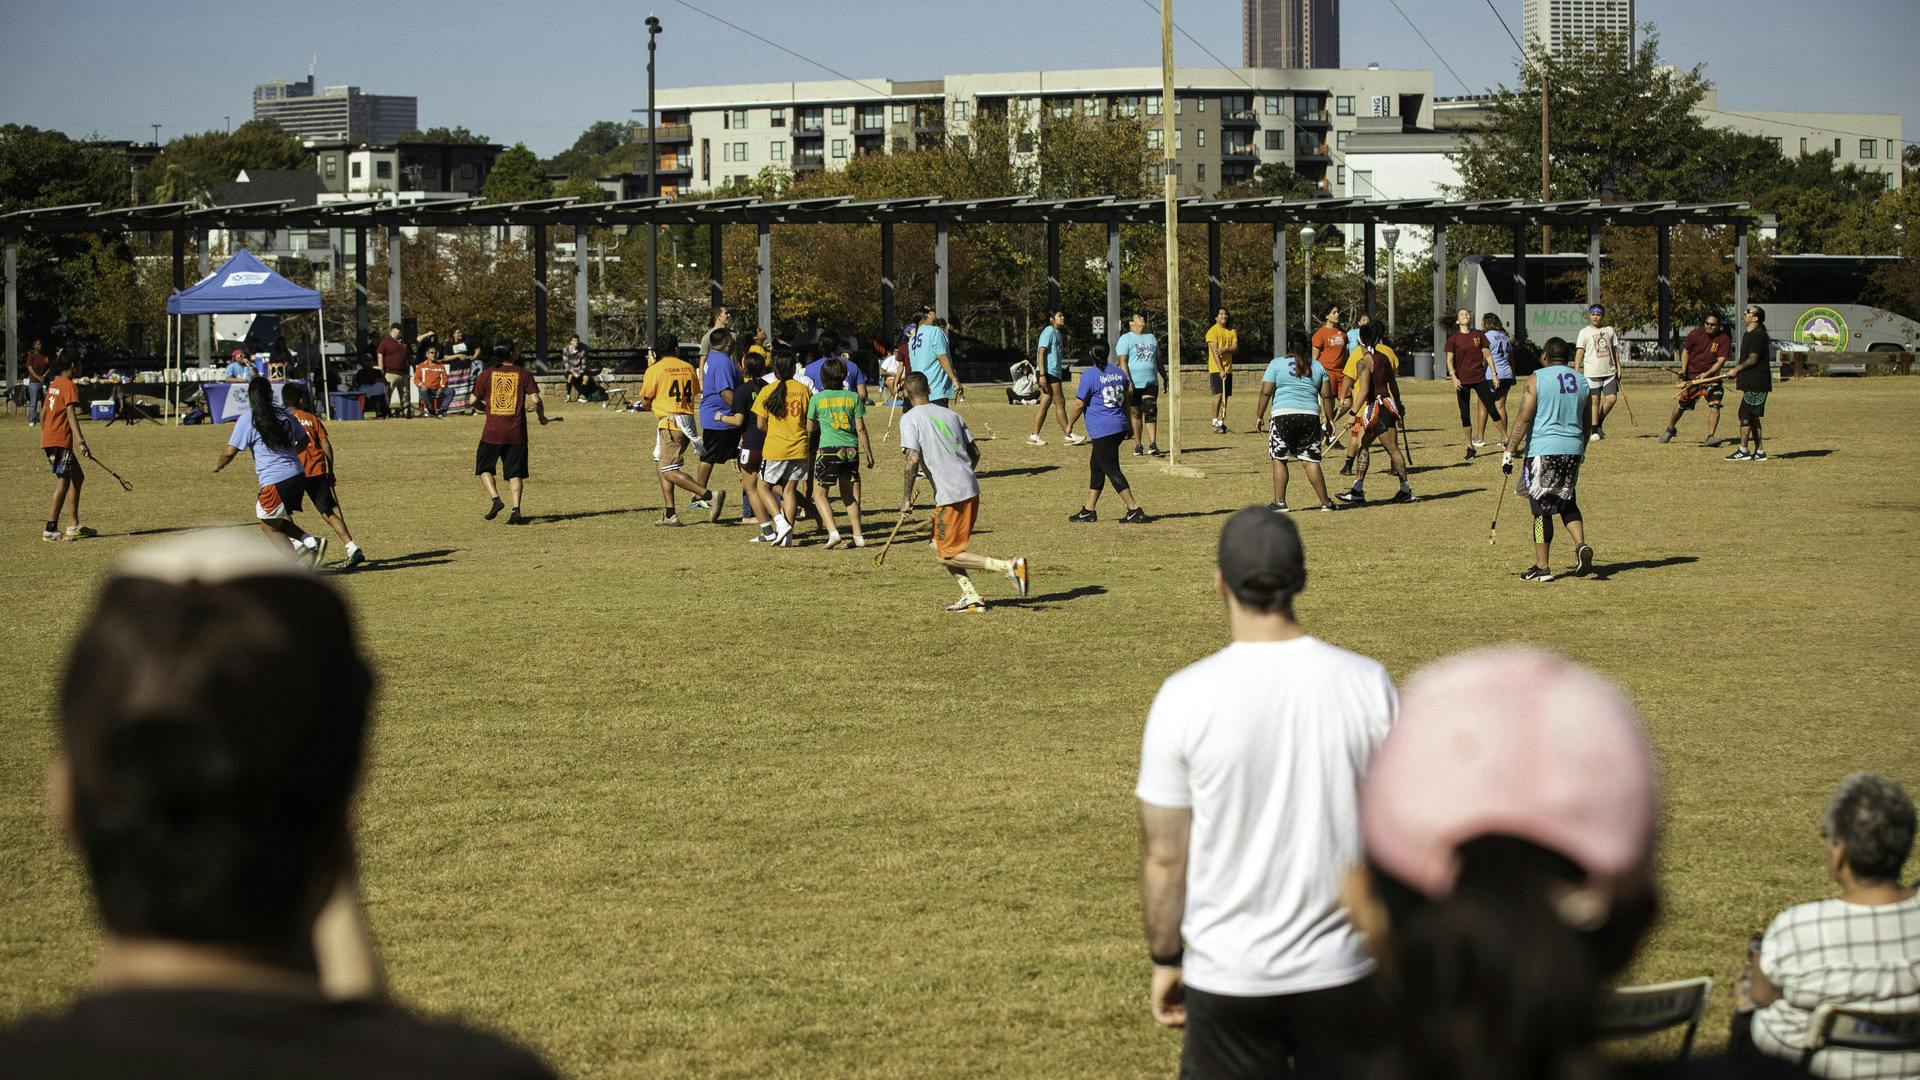 A group of people play Stickball on a field while spectators watch on.